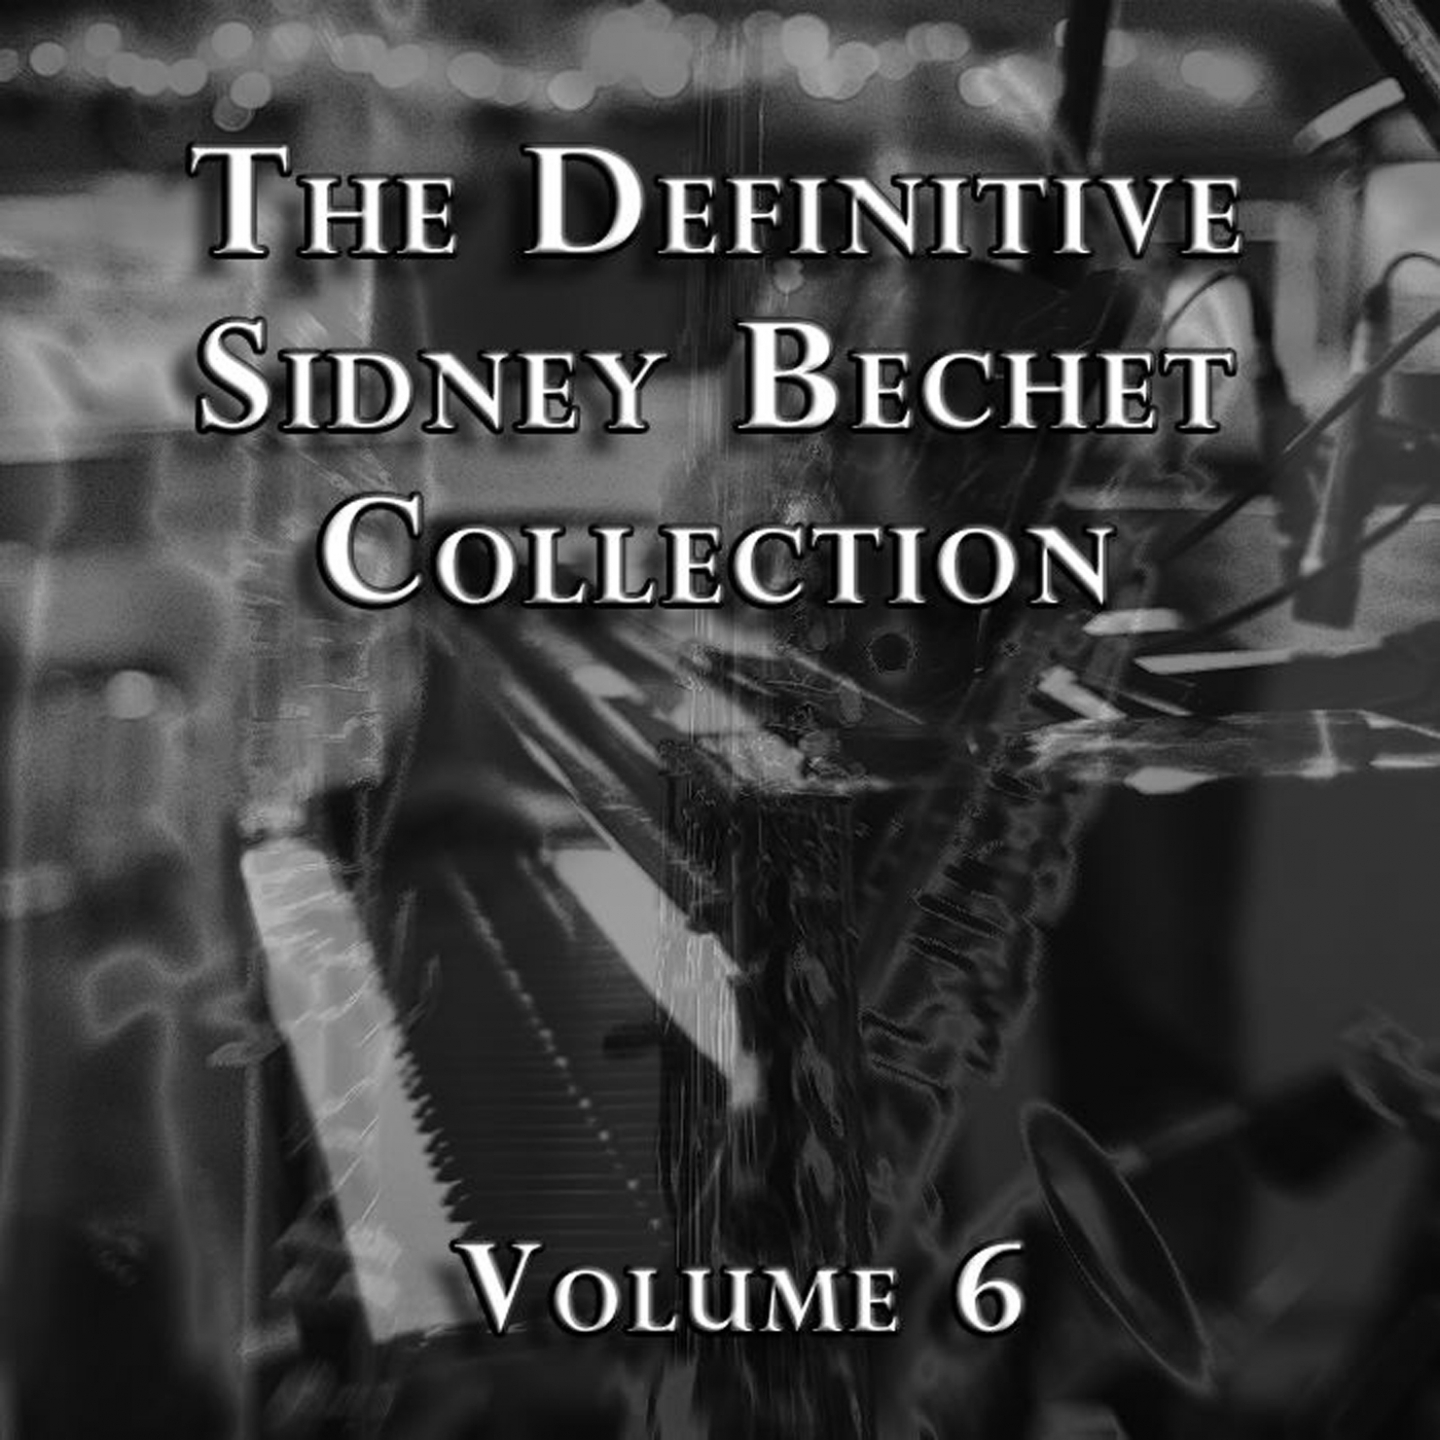 The Definitive Sidney Bechet Collection, Vol. 6